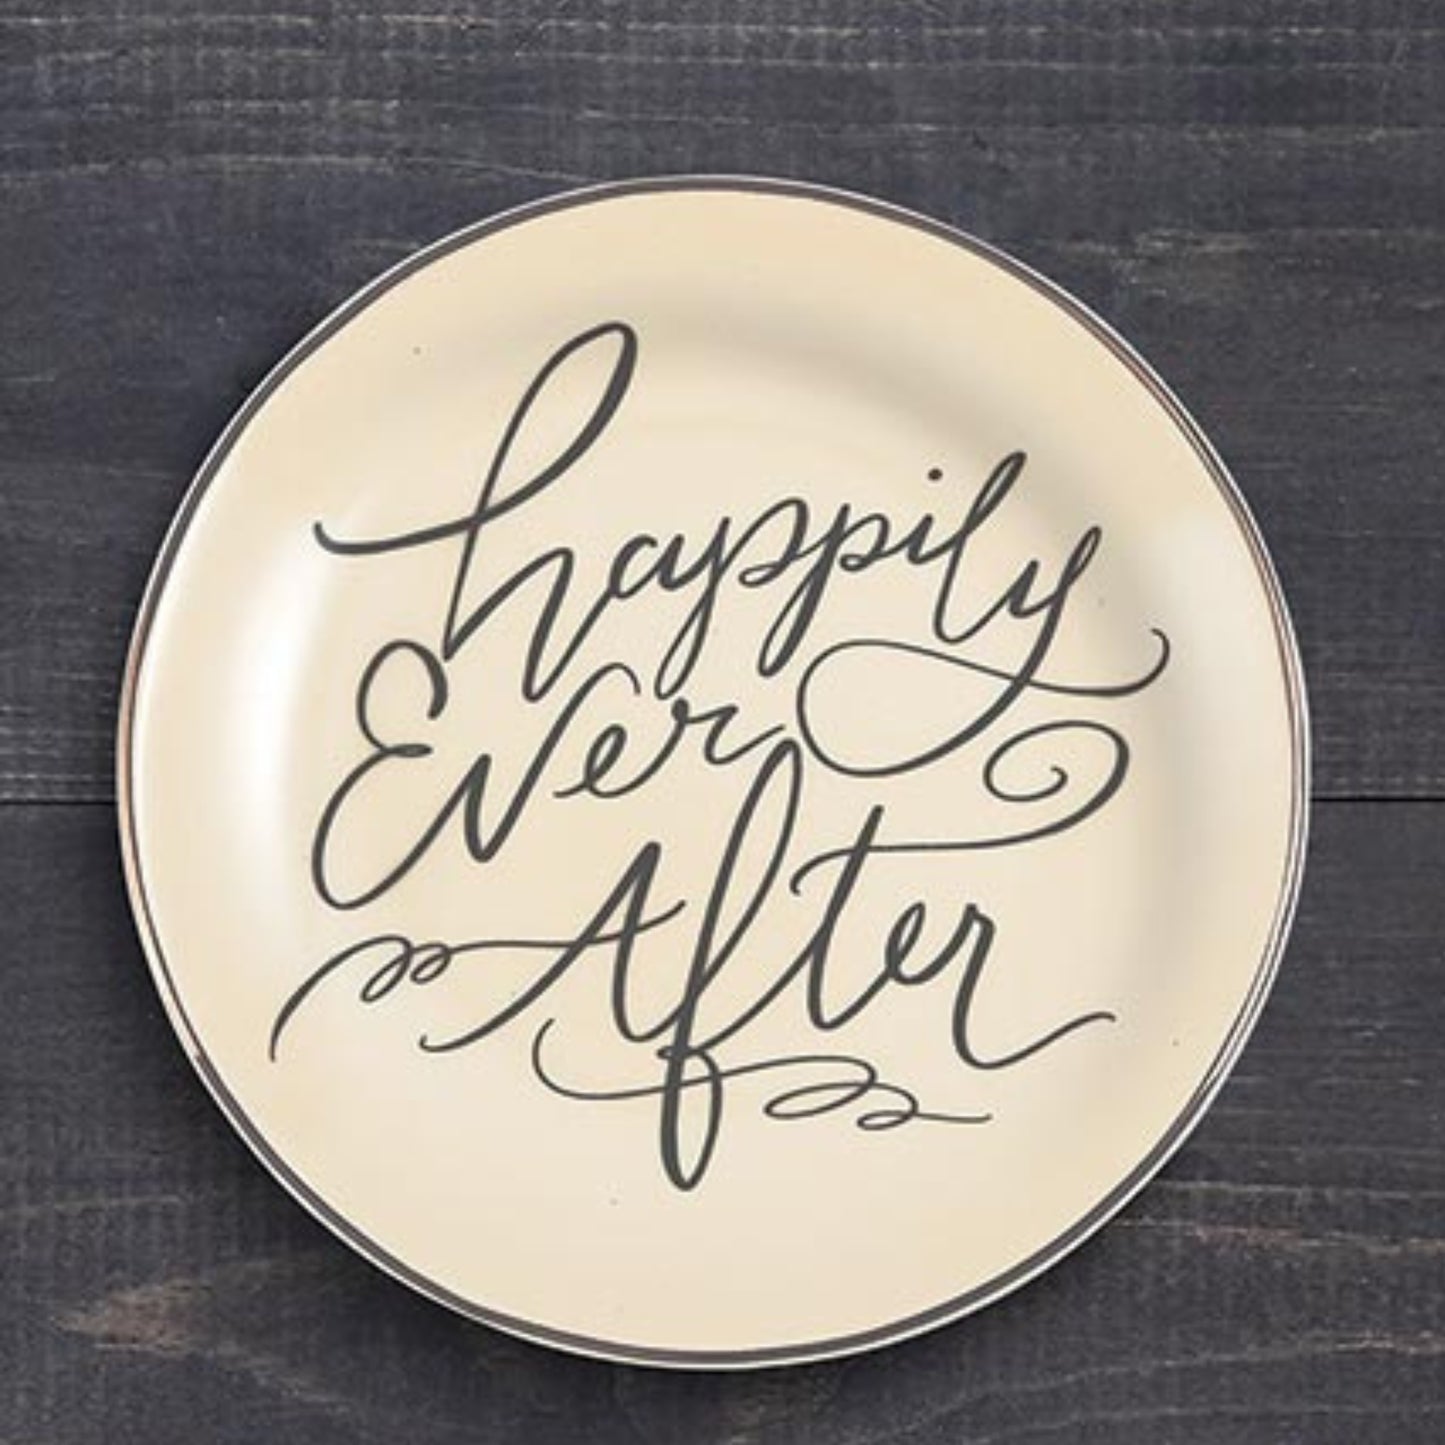 Happily Ever After Ceramic Trinket Tray - Wedding Gift - Anniversary Gift - Jewelry Dish - Ring Holder on rustic wood | oak7west.com